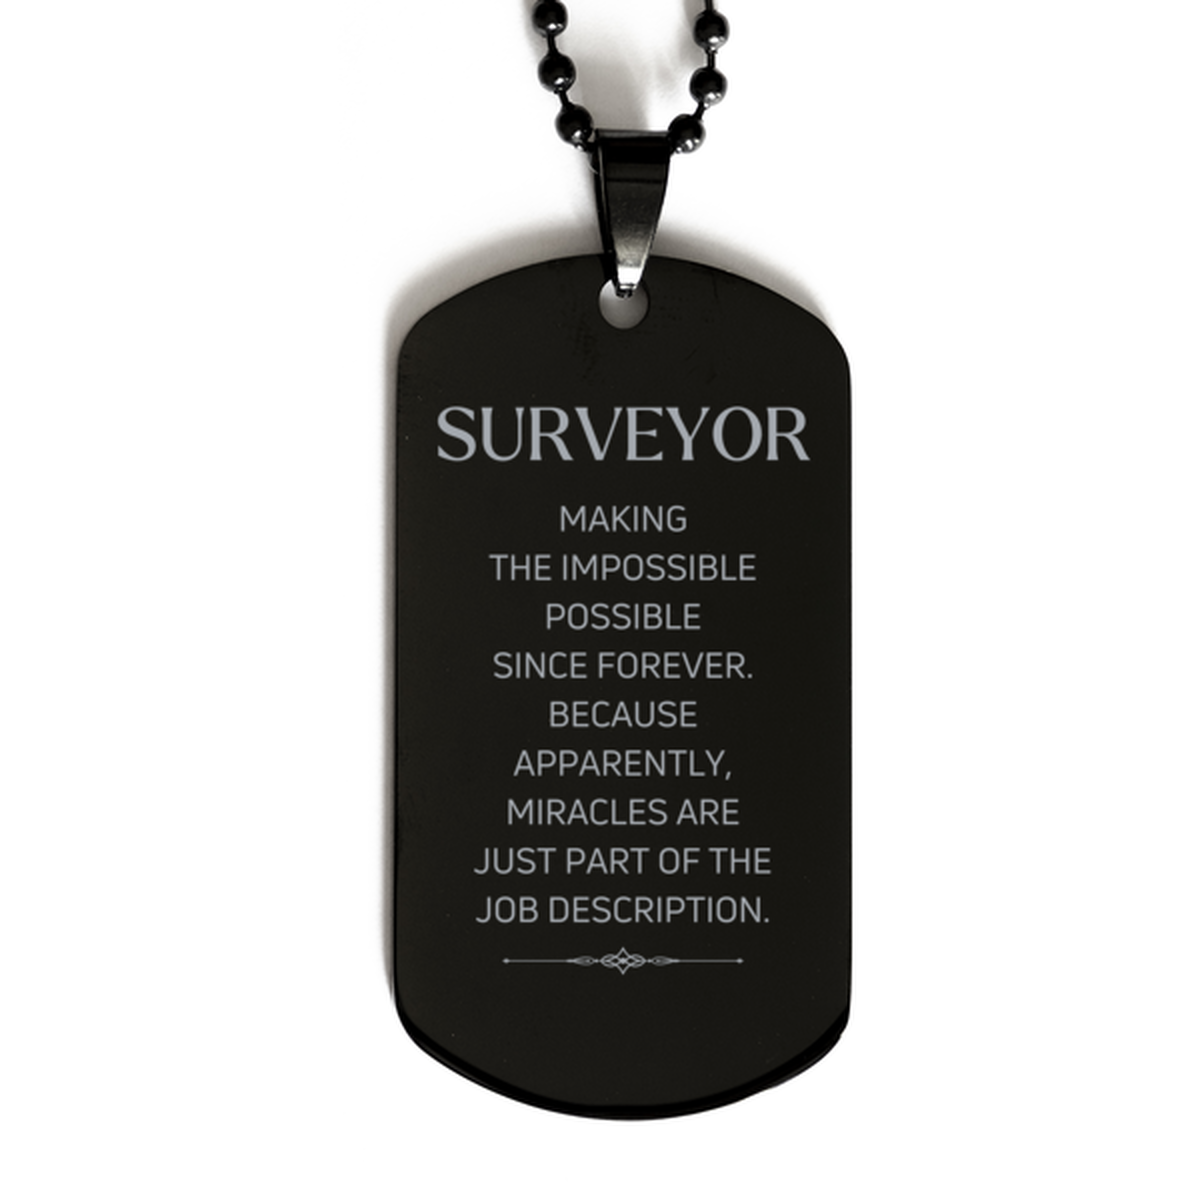 Funny Surveyor Gifts, Miracles are just part of the job description, Inspirational Birthday Black Dog Tag For Surveyor, Men, Women, Coworkers, Friends, Boss